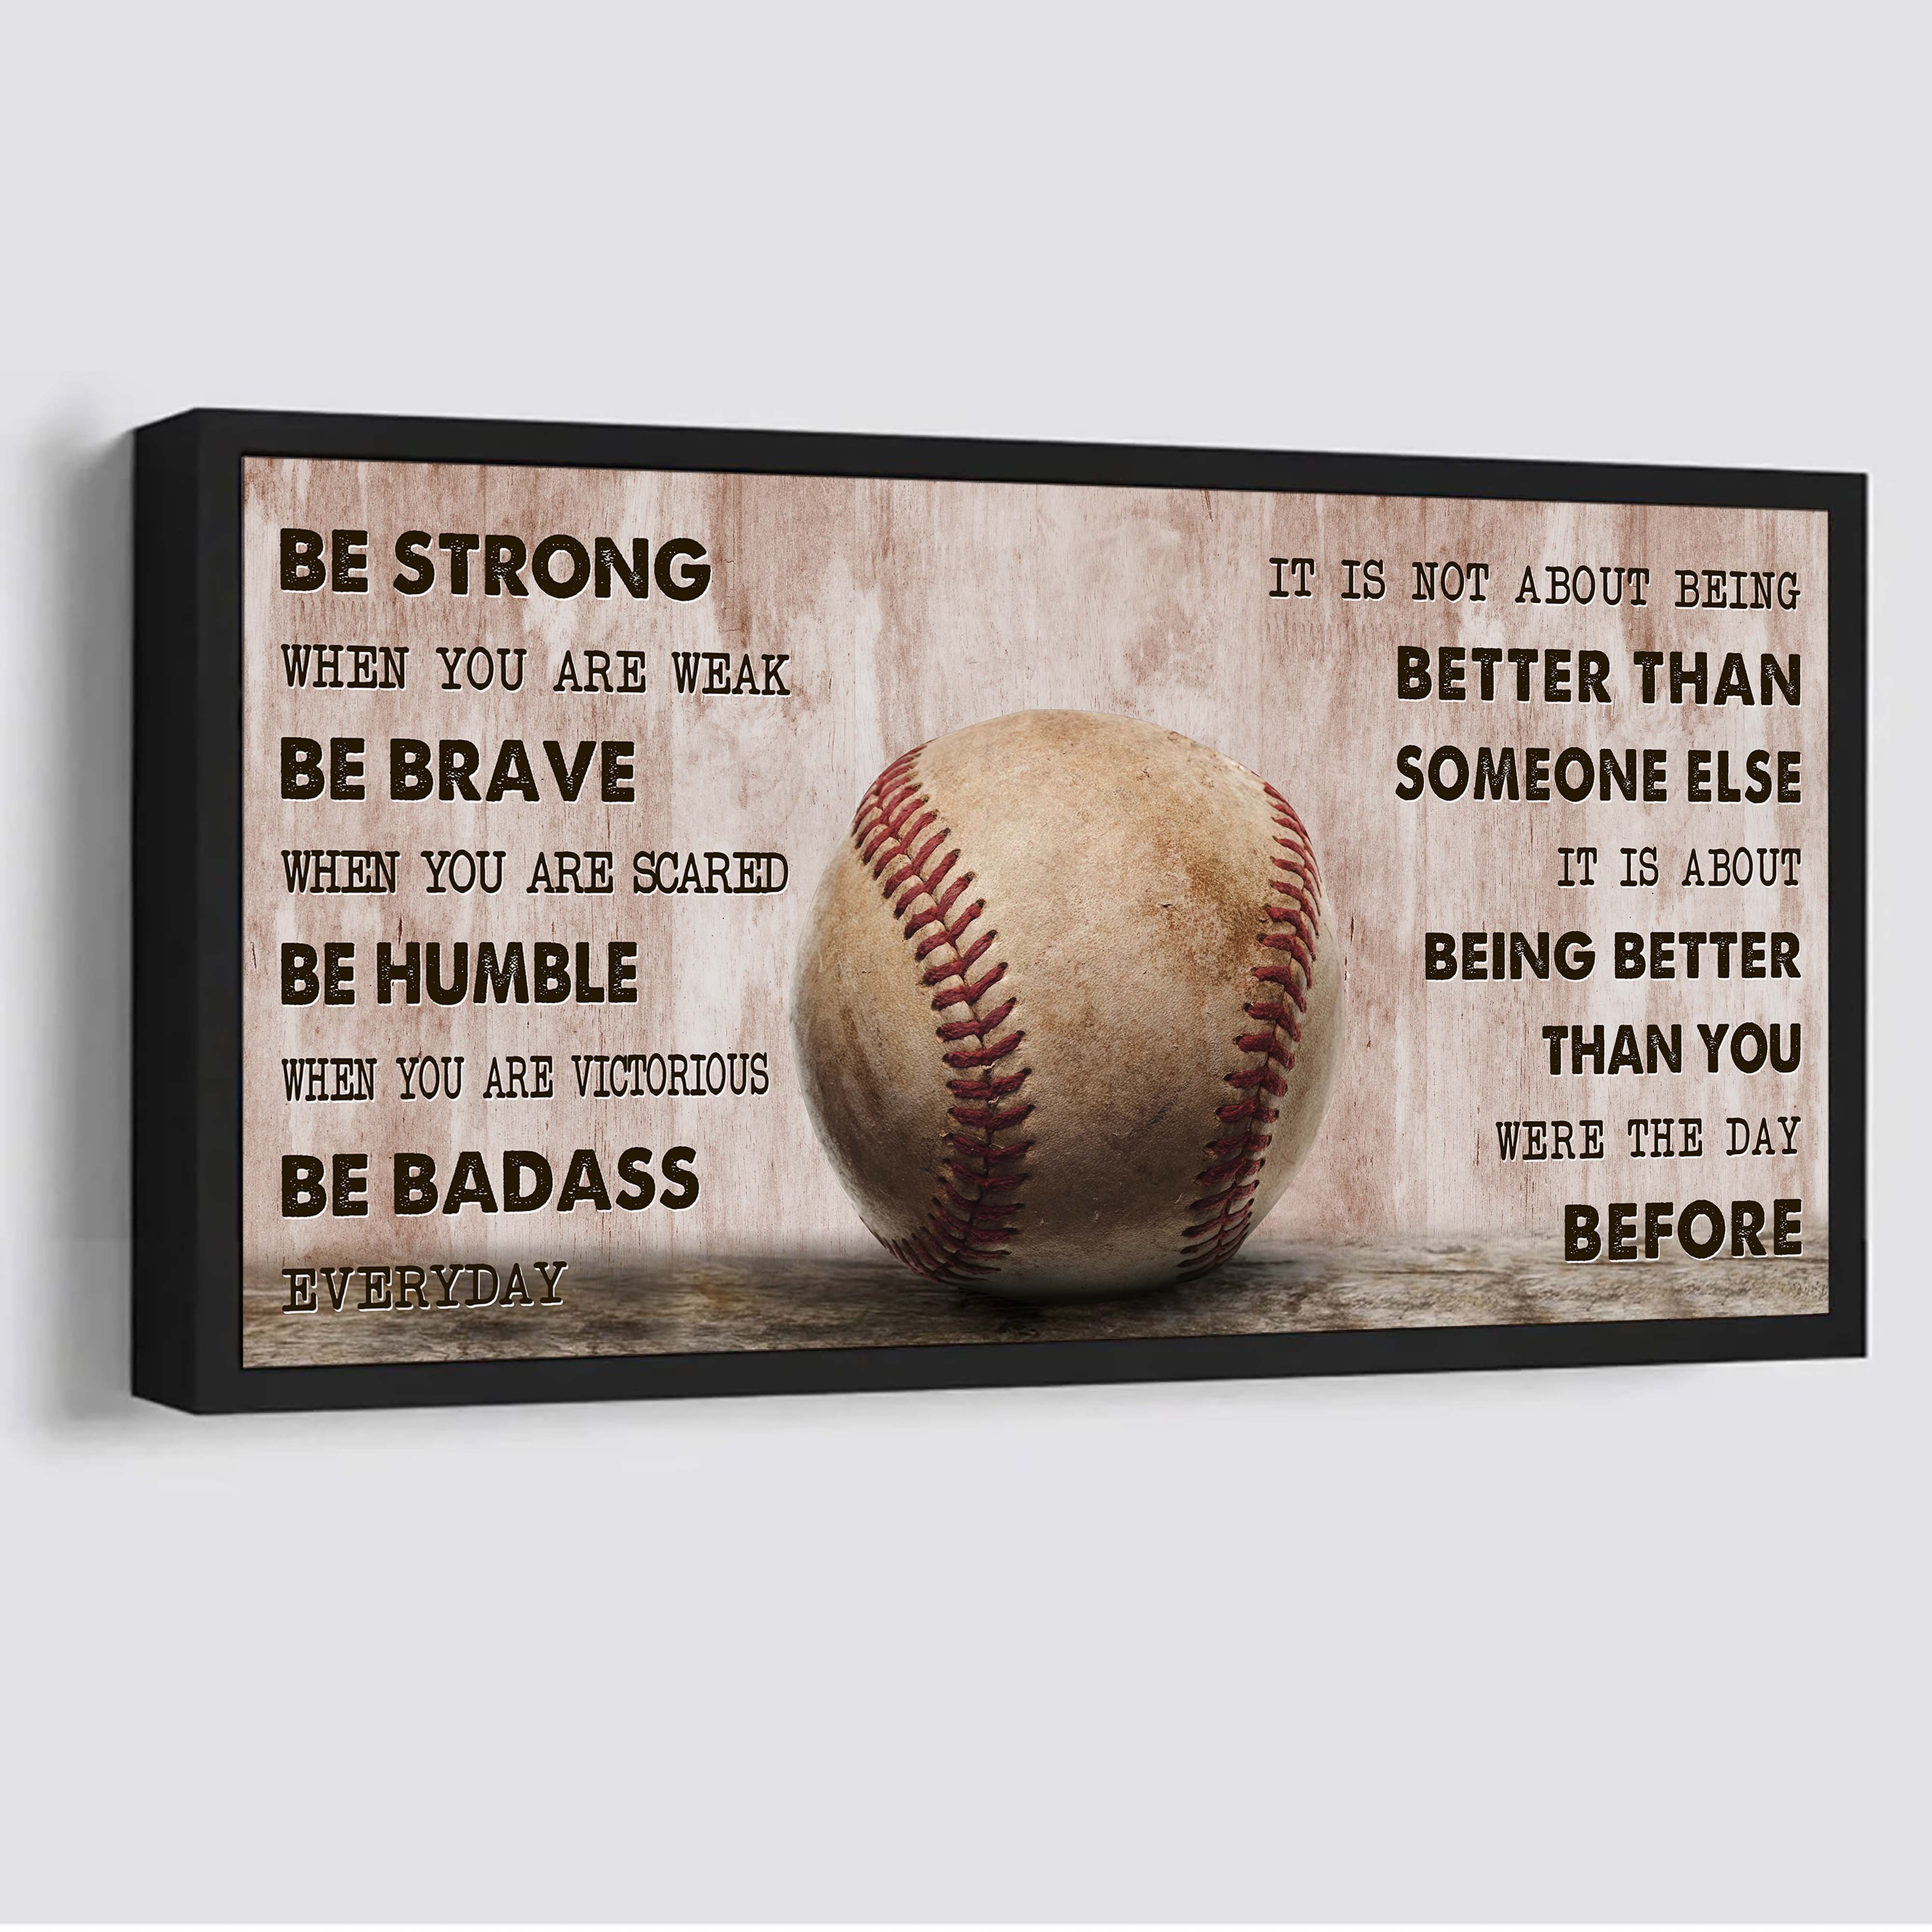 Hockey canvas It Is Not About Being Better Than Someone Else - Be Strong When You Are Weak